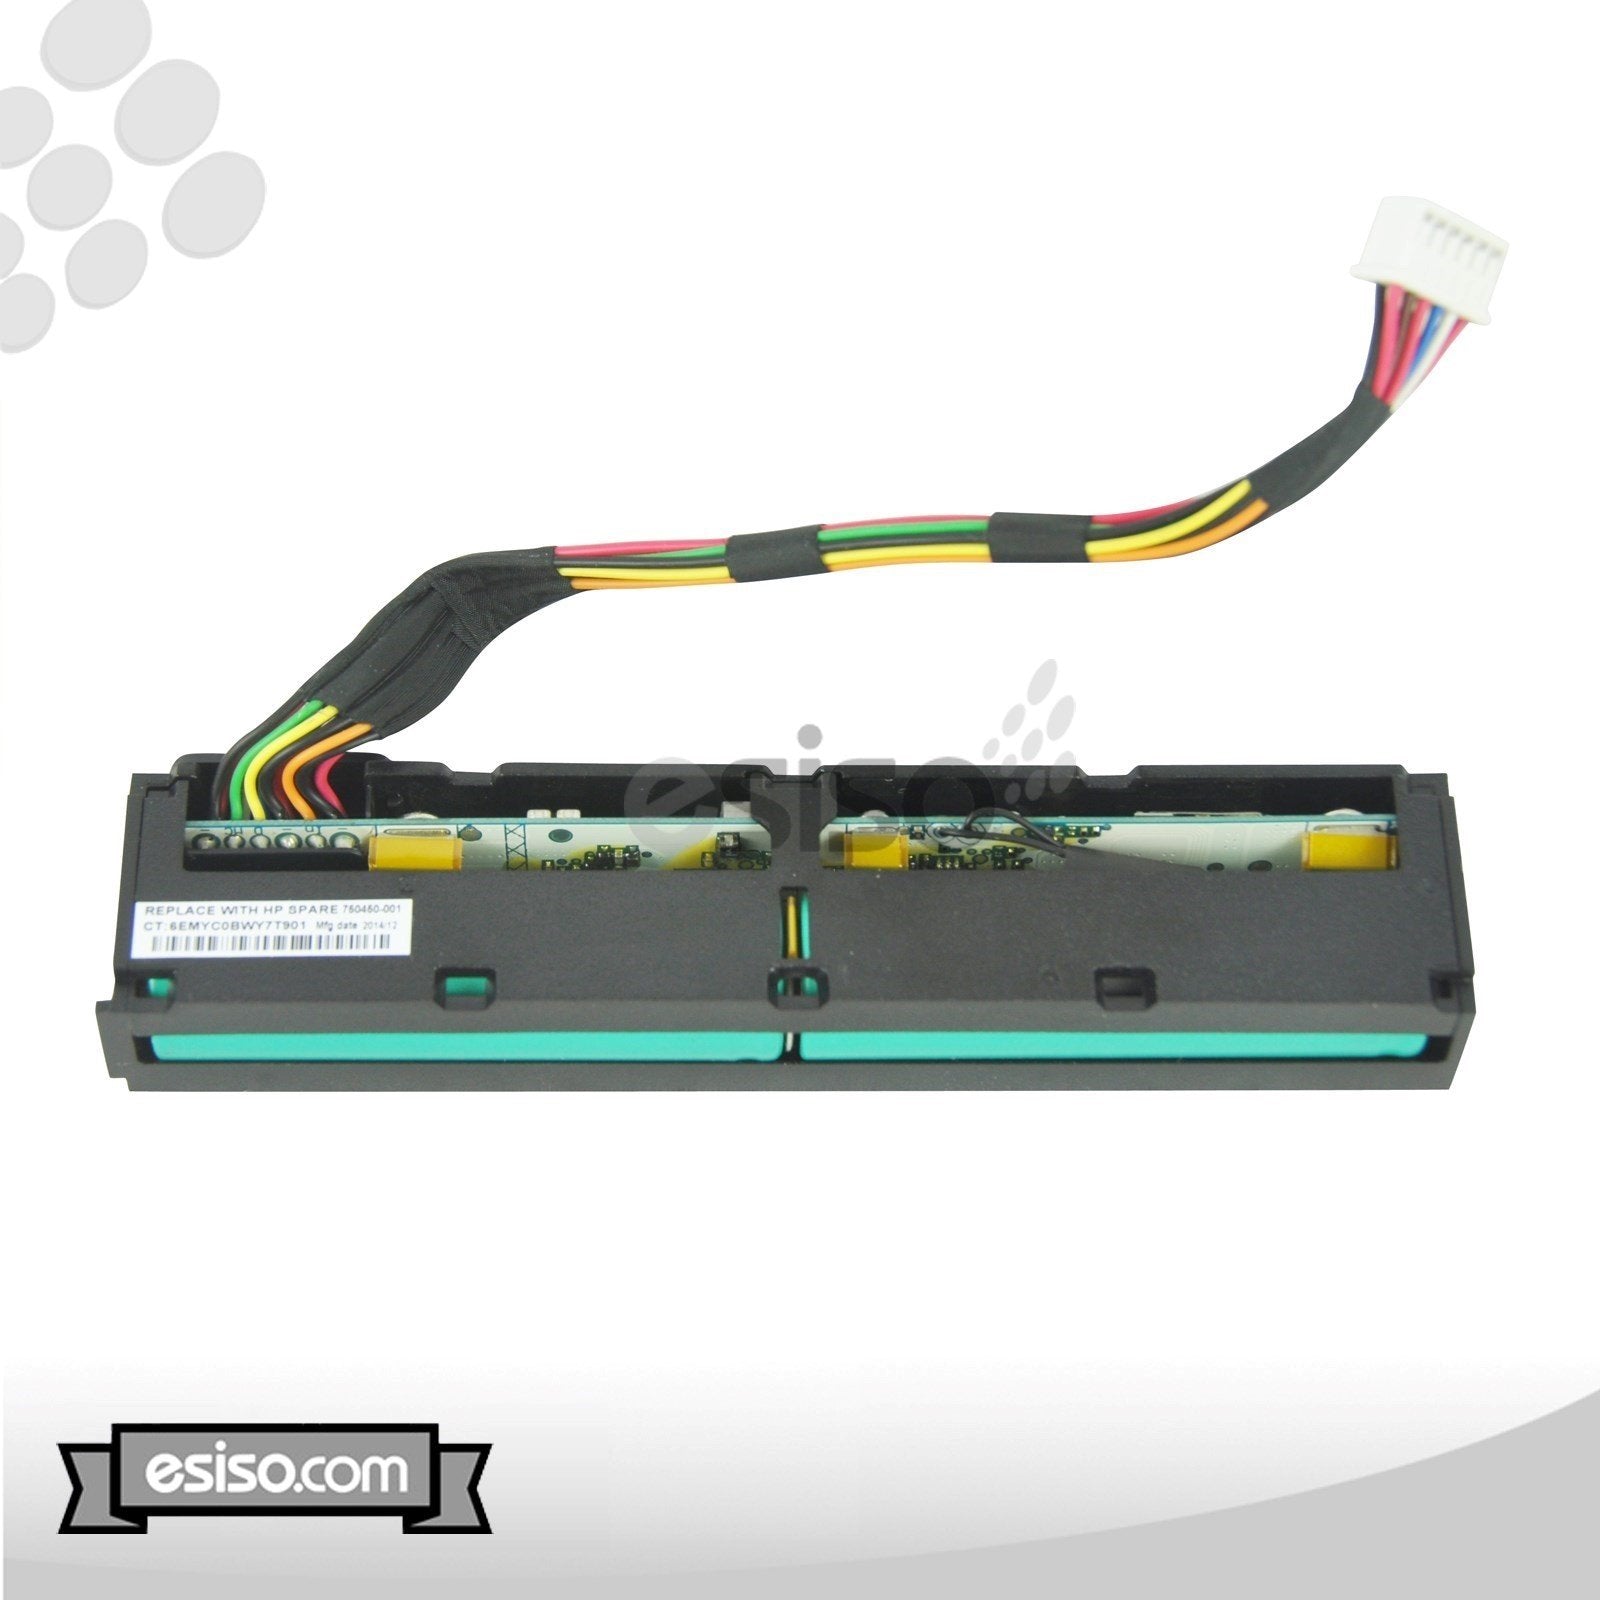 727258-B21 HPE 96W SMART STORAGE BATTERY W/ 145MM CABLE FOR DL ML SL SERVERS